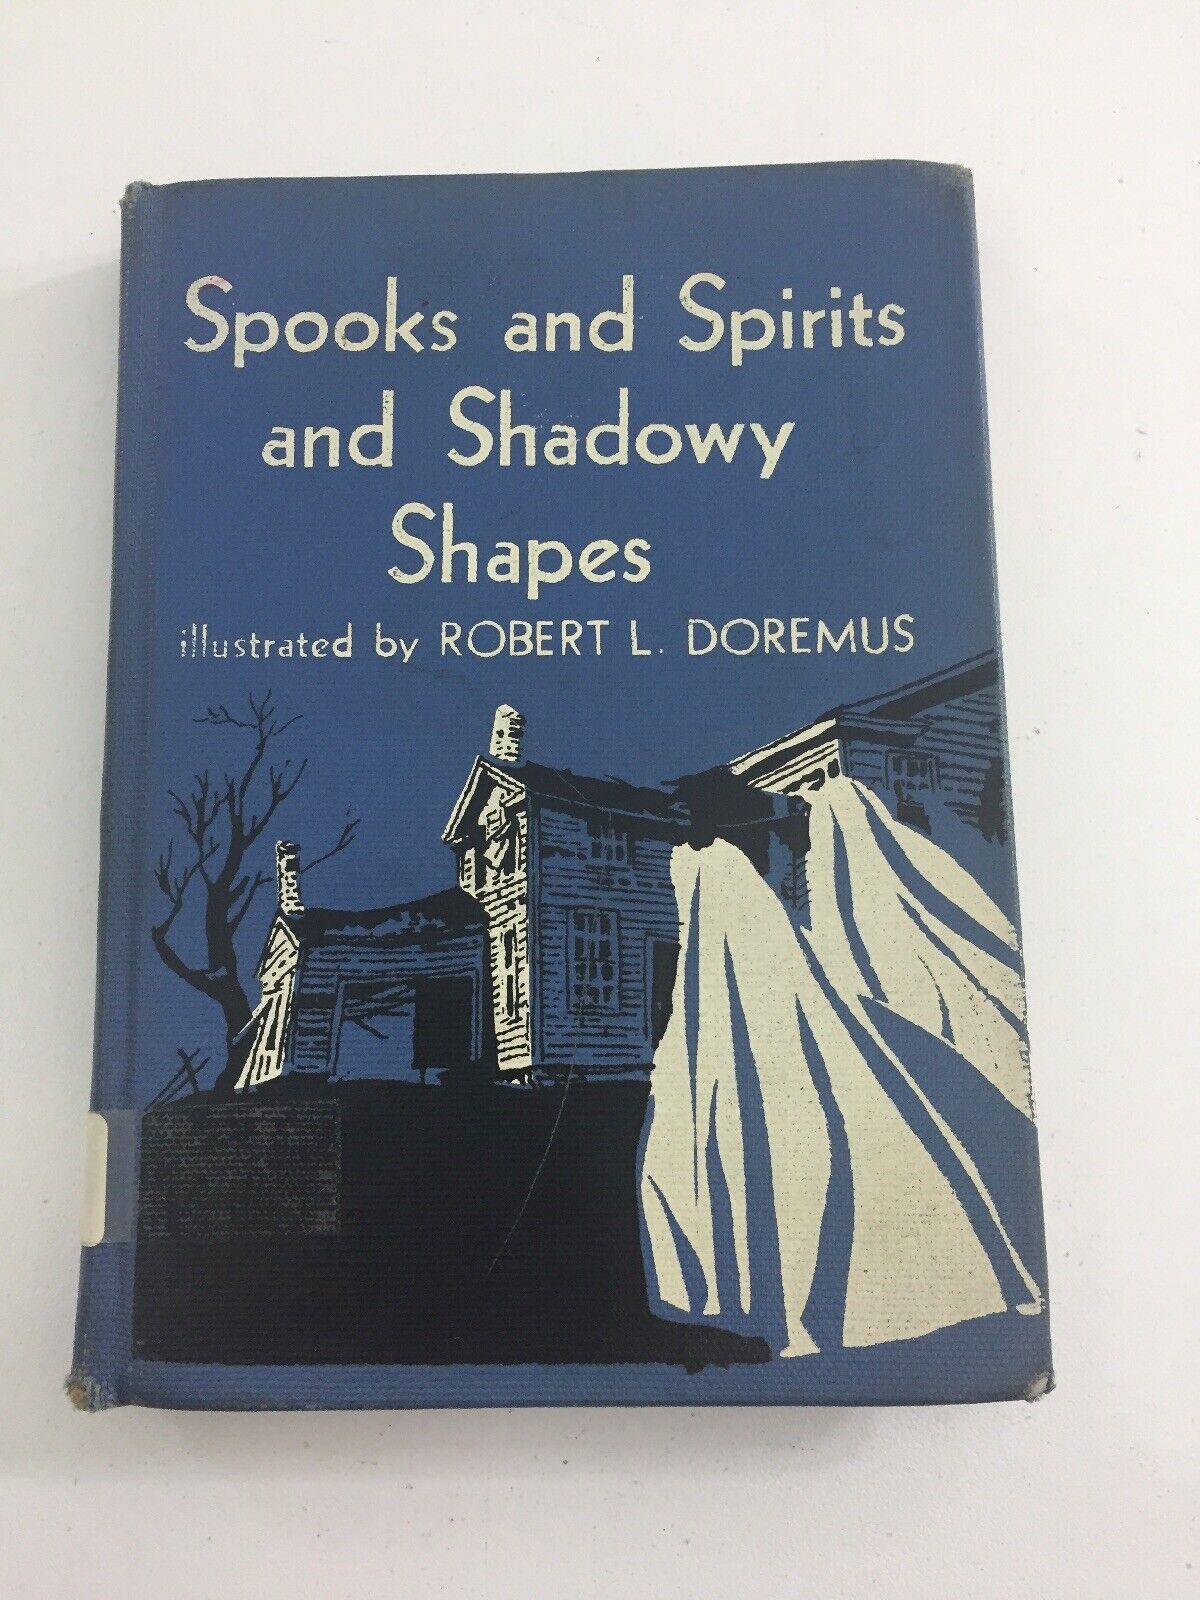 Spooks And Spirits And Shadowy Shapes - Aladdin Books (1954, Hardcover)